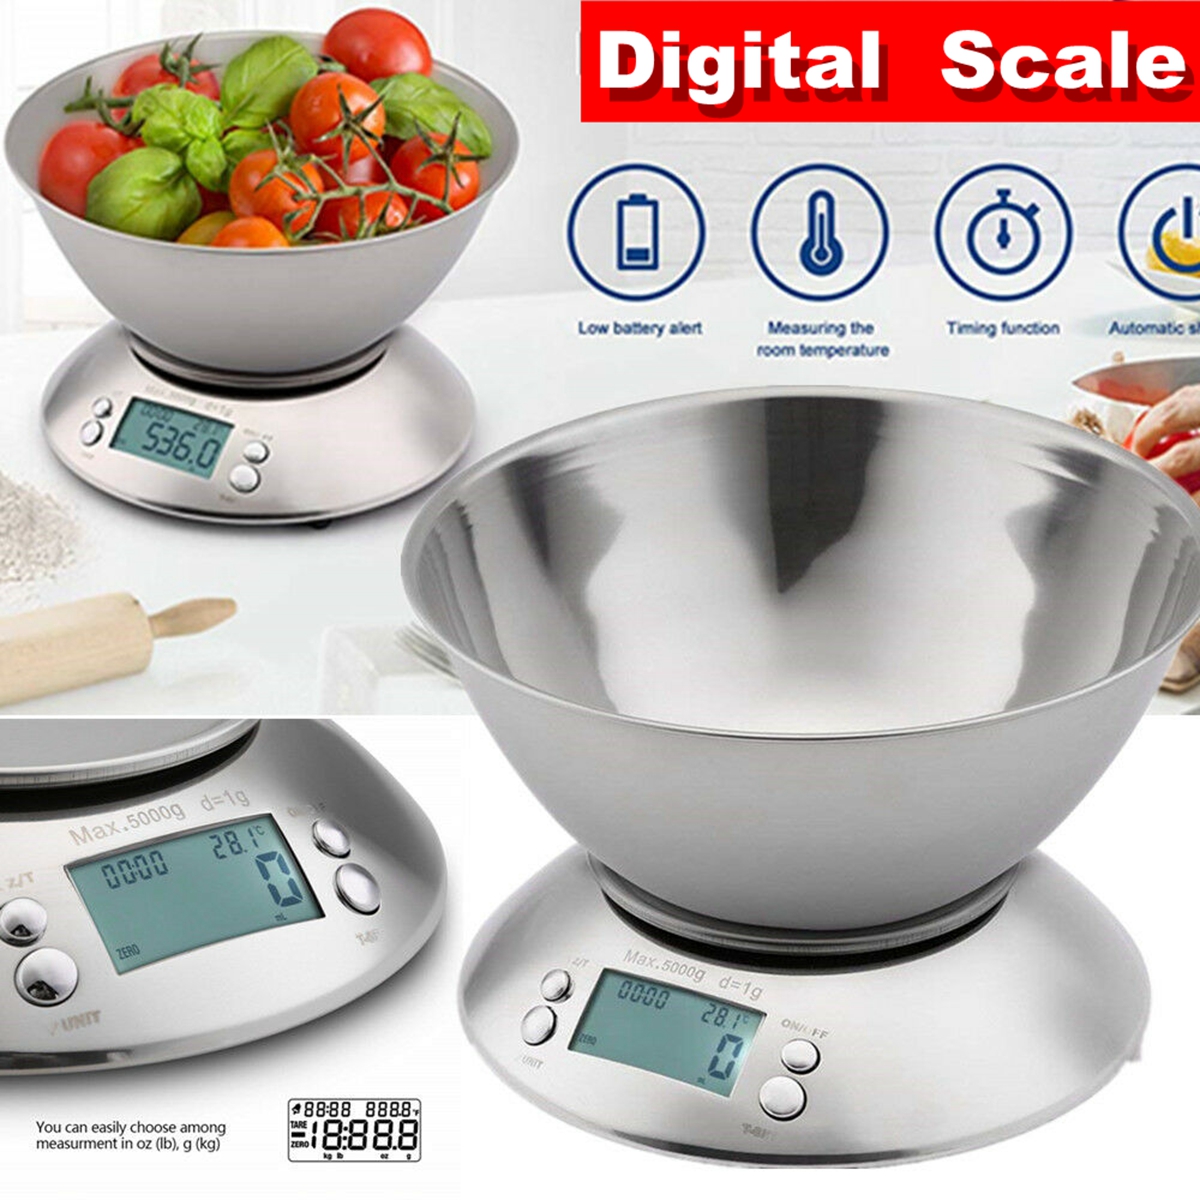 Digital-Kitchen-Scale-LCD-Display-Stainless-Steel-Baking-High-Precision-Removable-Kitchen-Scale-1859940-1